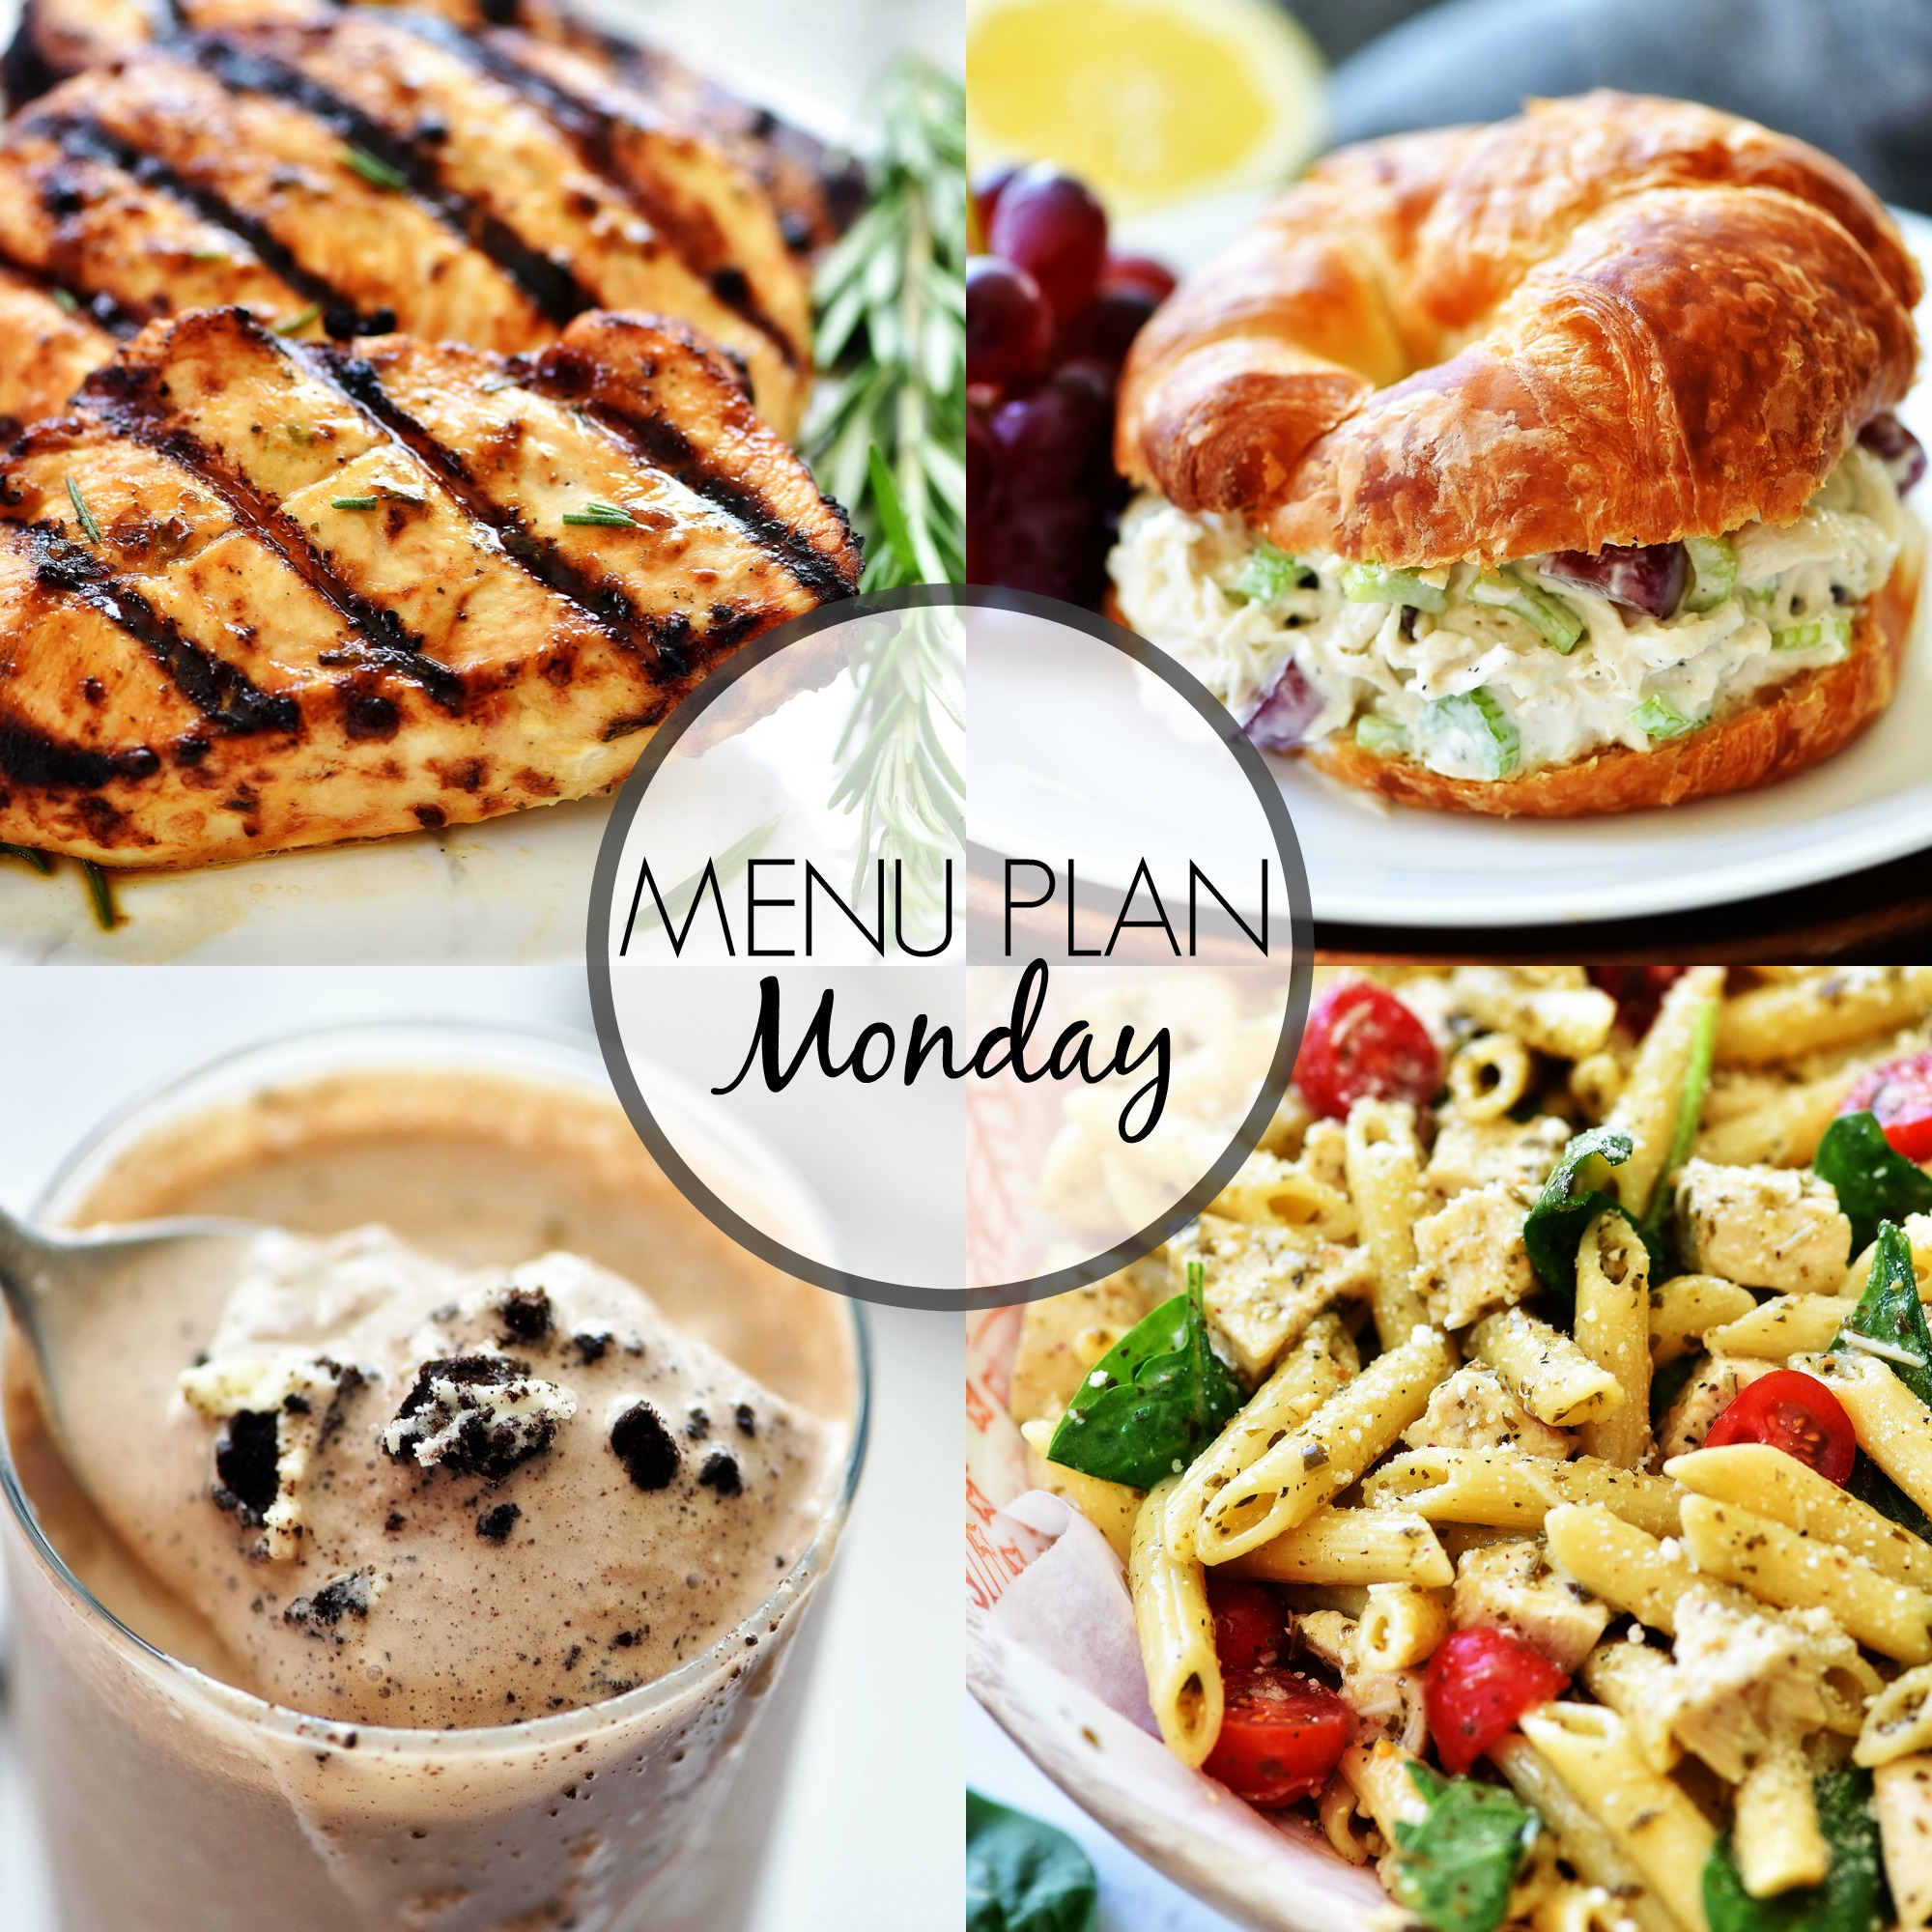 Menu Plan Monday is a list of dinner ideas that can get you through the week. Each menu has six dinner ideas and one dessert. Life-in-the-Lofthouse.com 